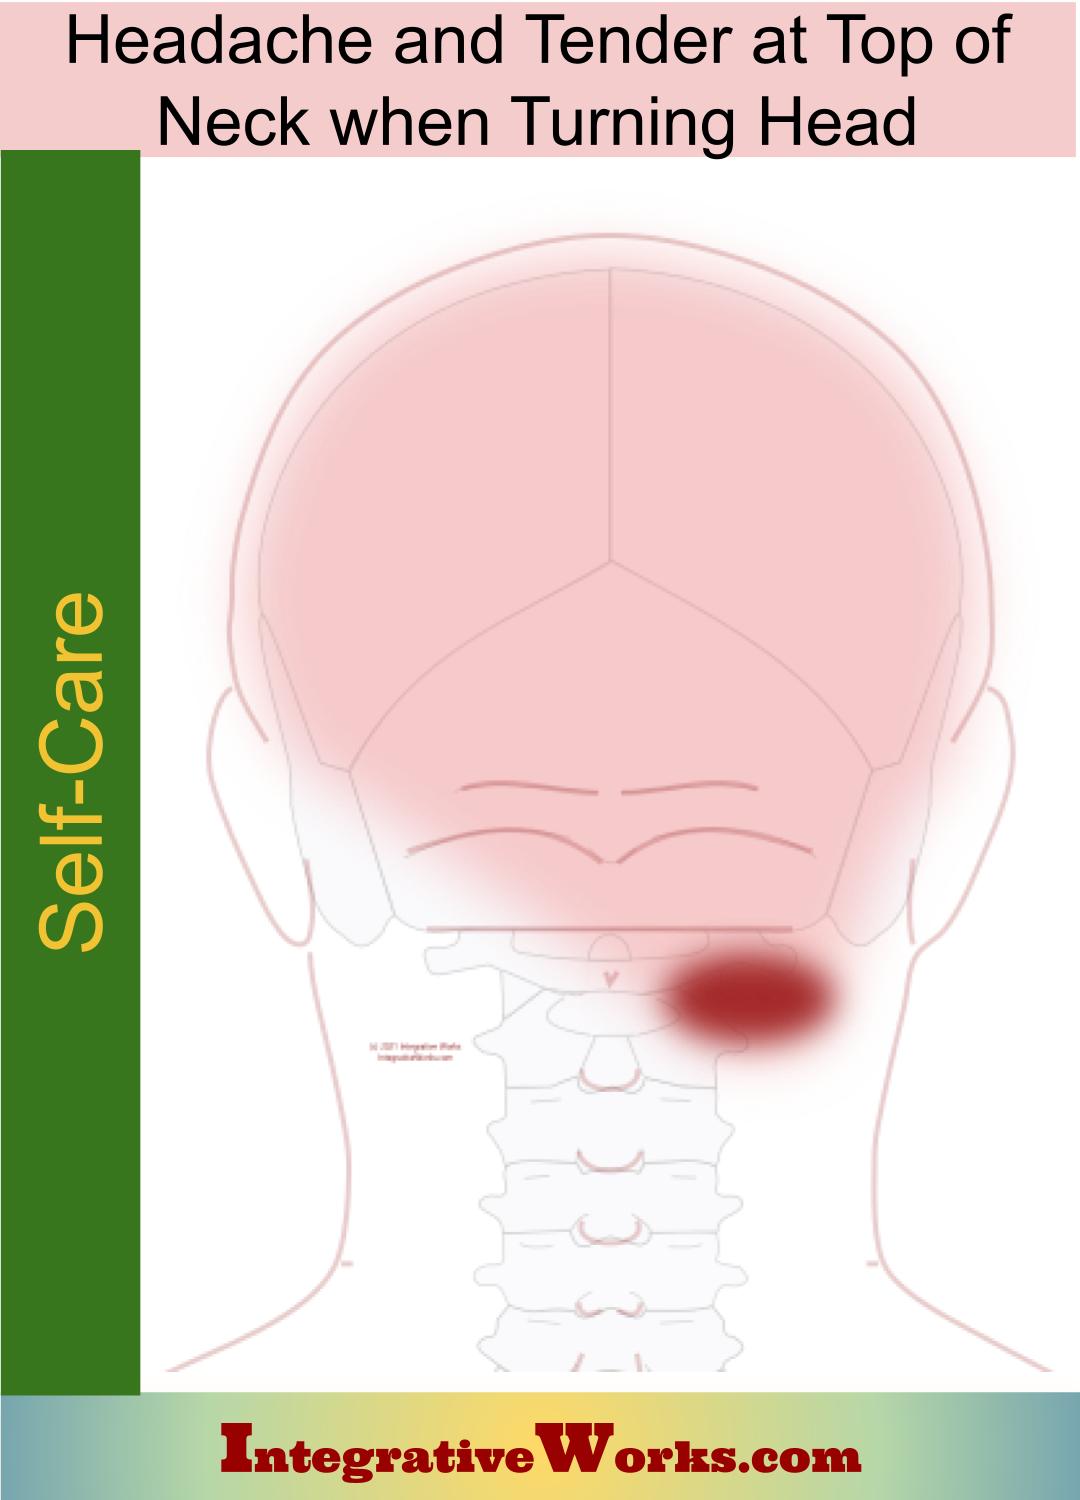 Self Care – Headache and Tender at Top of Neck when Turning Head